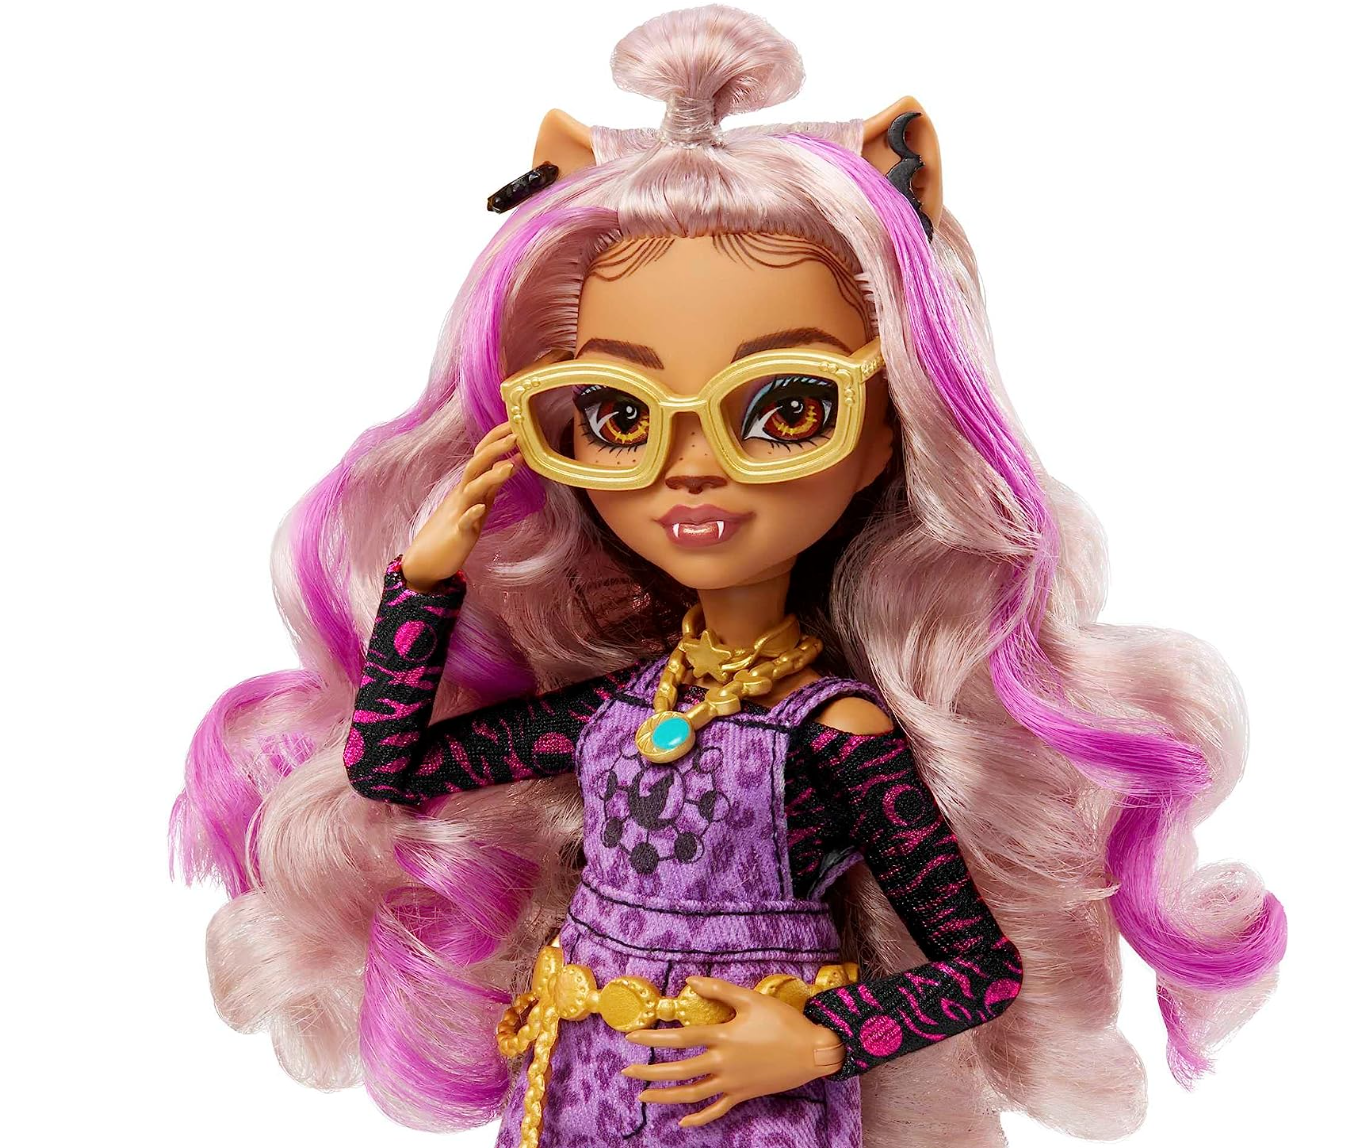 Monster High Clawdeen Wolf Fashion Doll with Purple Streaked Hair, Signature Look, Accessories & Pet Dog